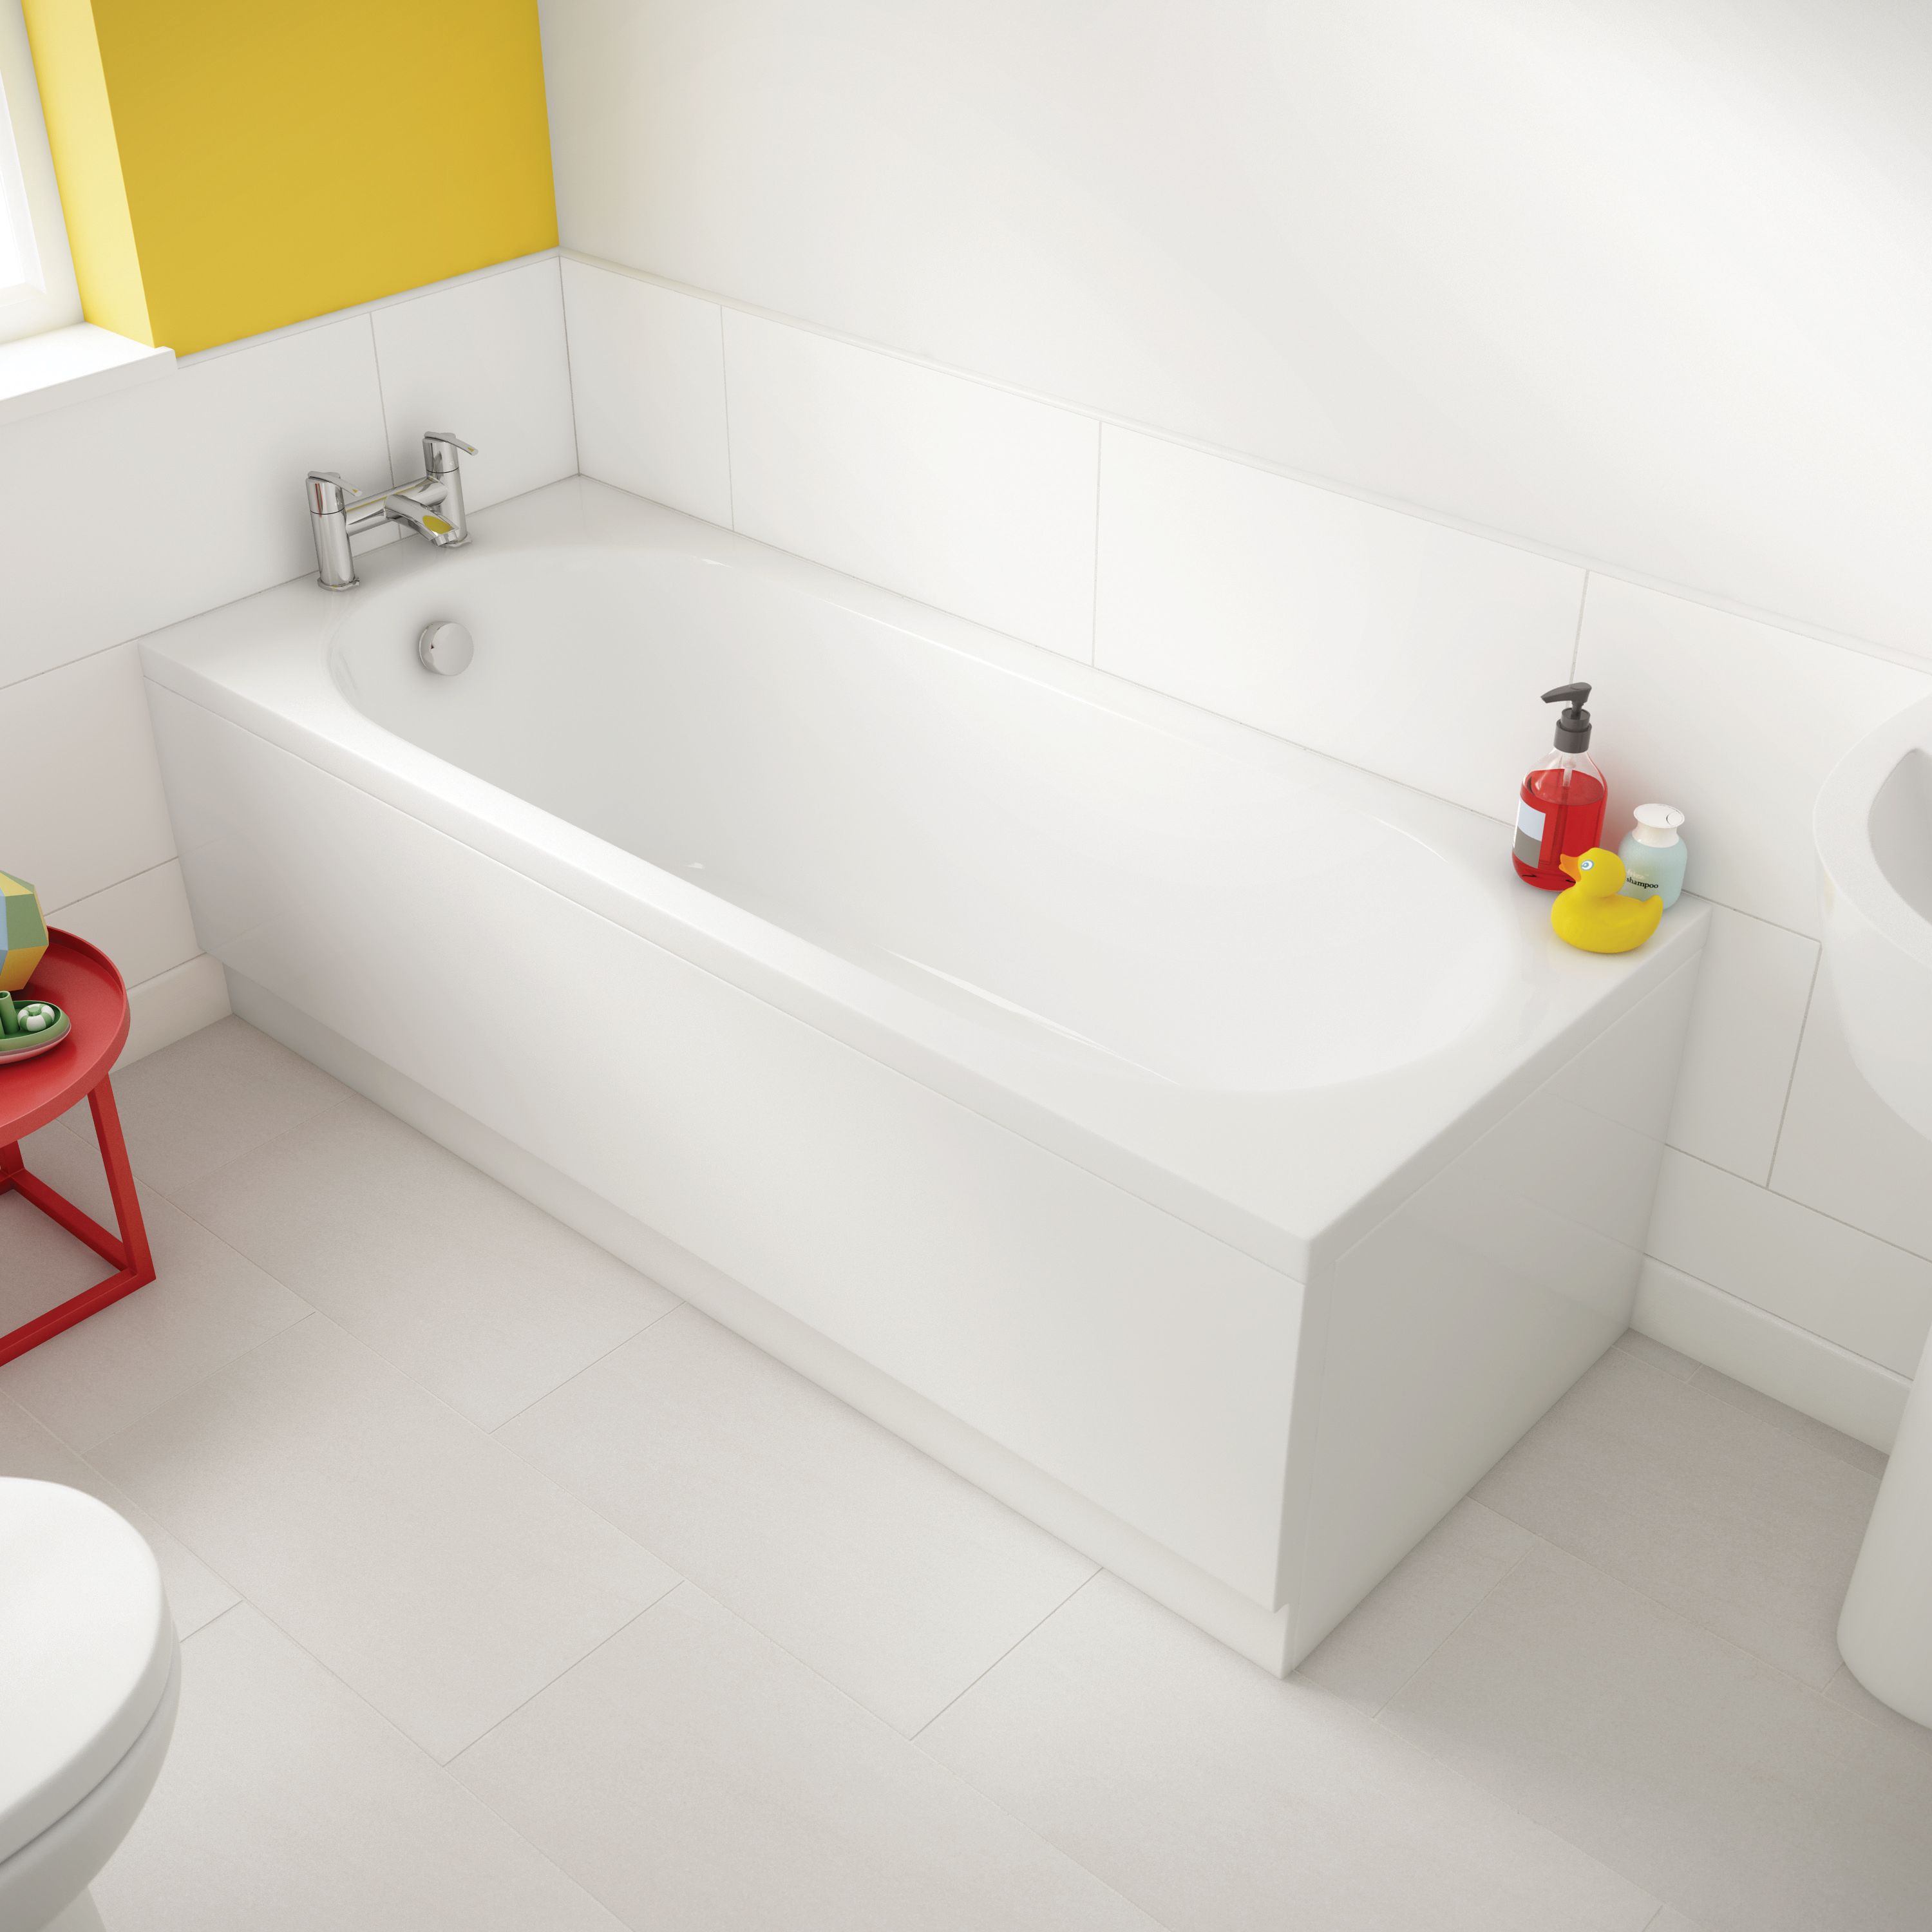 Image of Wickes Forenza Straight Bath - 1700 x 700mm